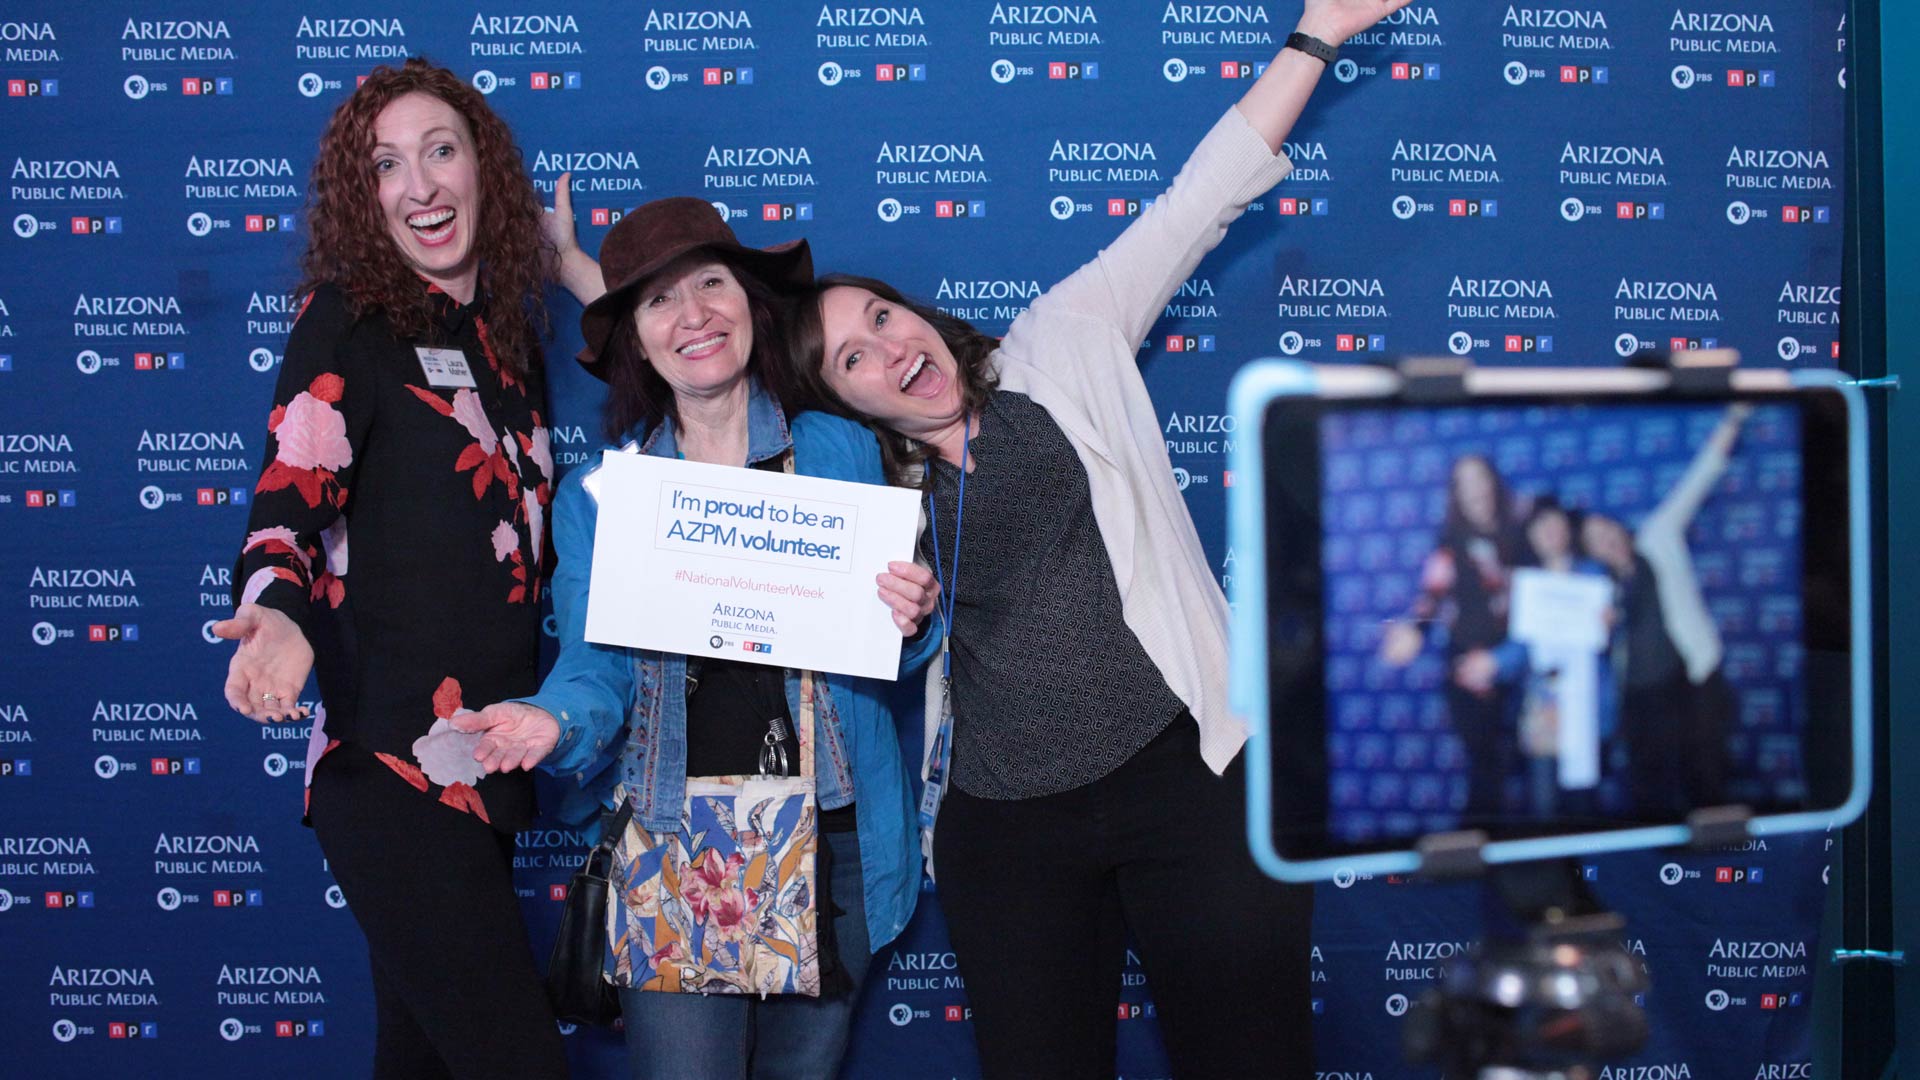 Volunteers and staff had fun at the AZPM photo booth during the reception on April 19.